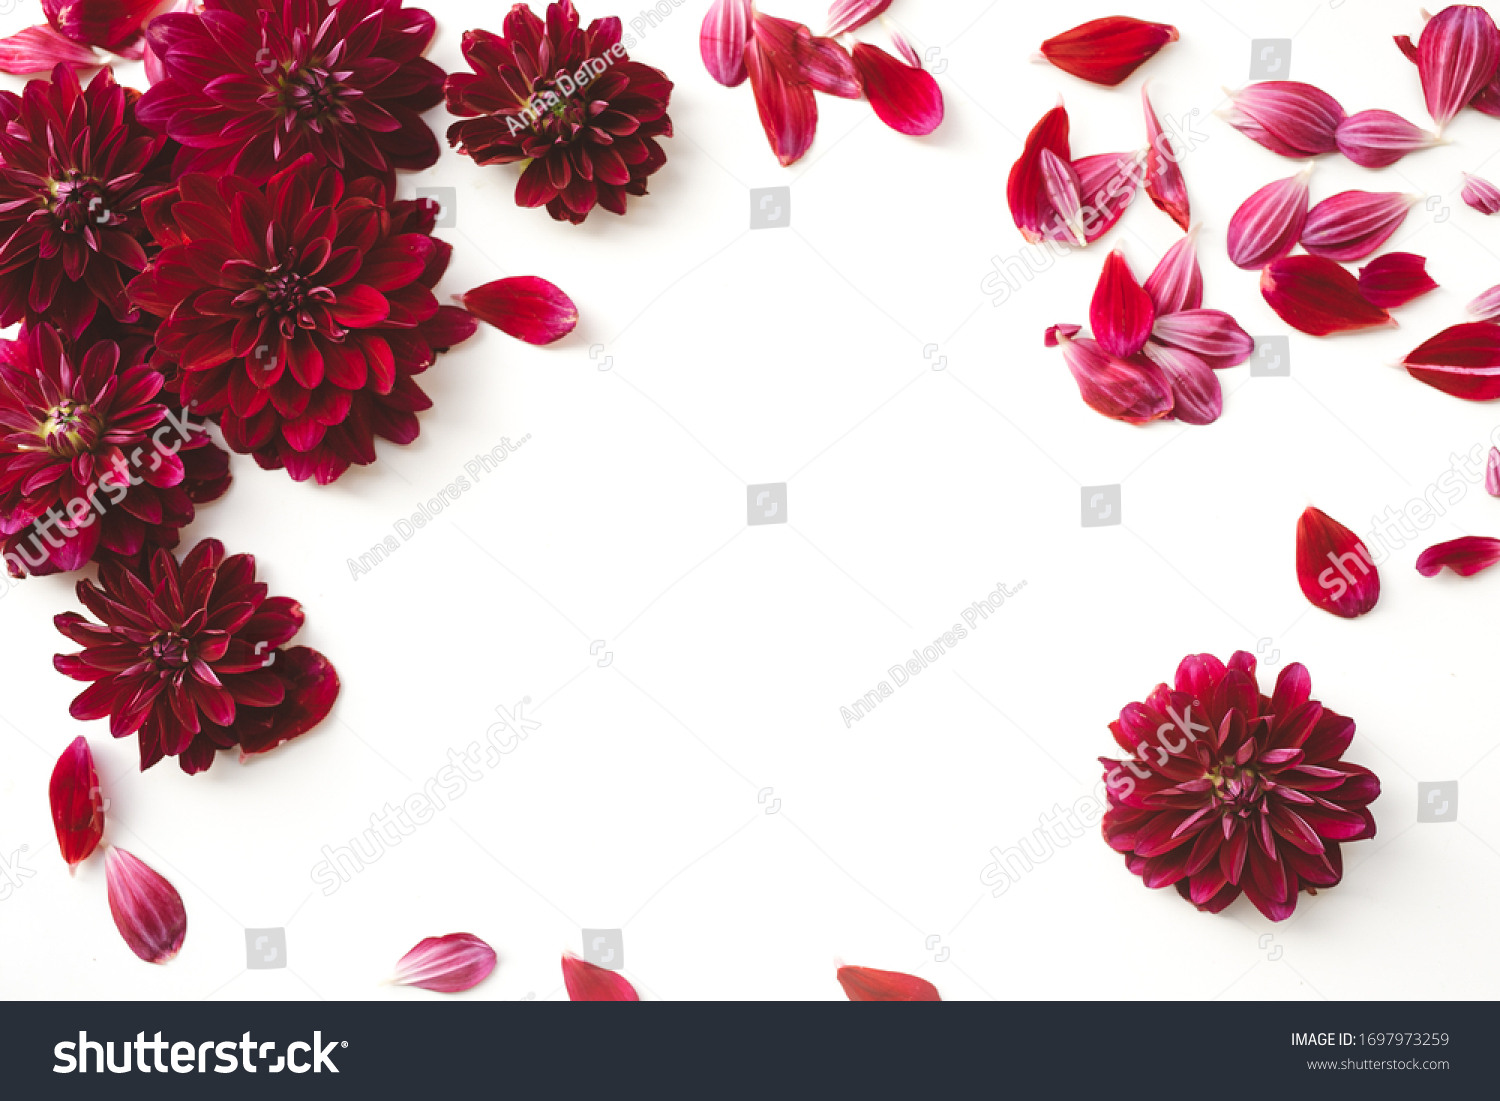 Red dahlia flowers with scattered petals, crimson floral border with blossom frame on white background #1697973259